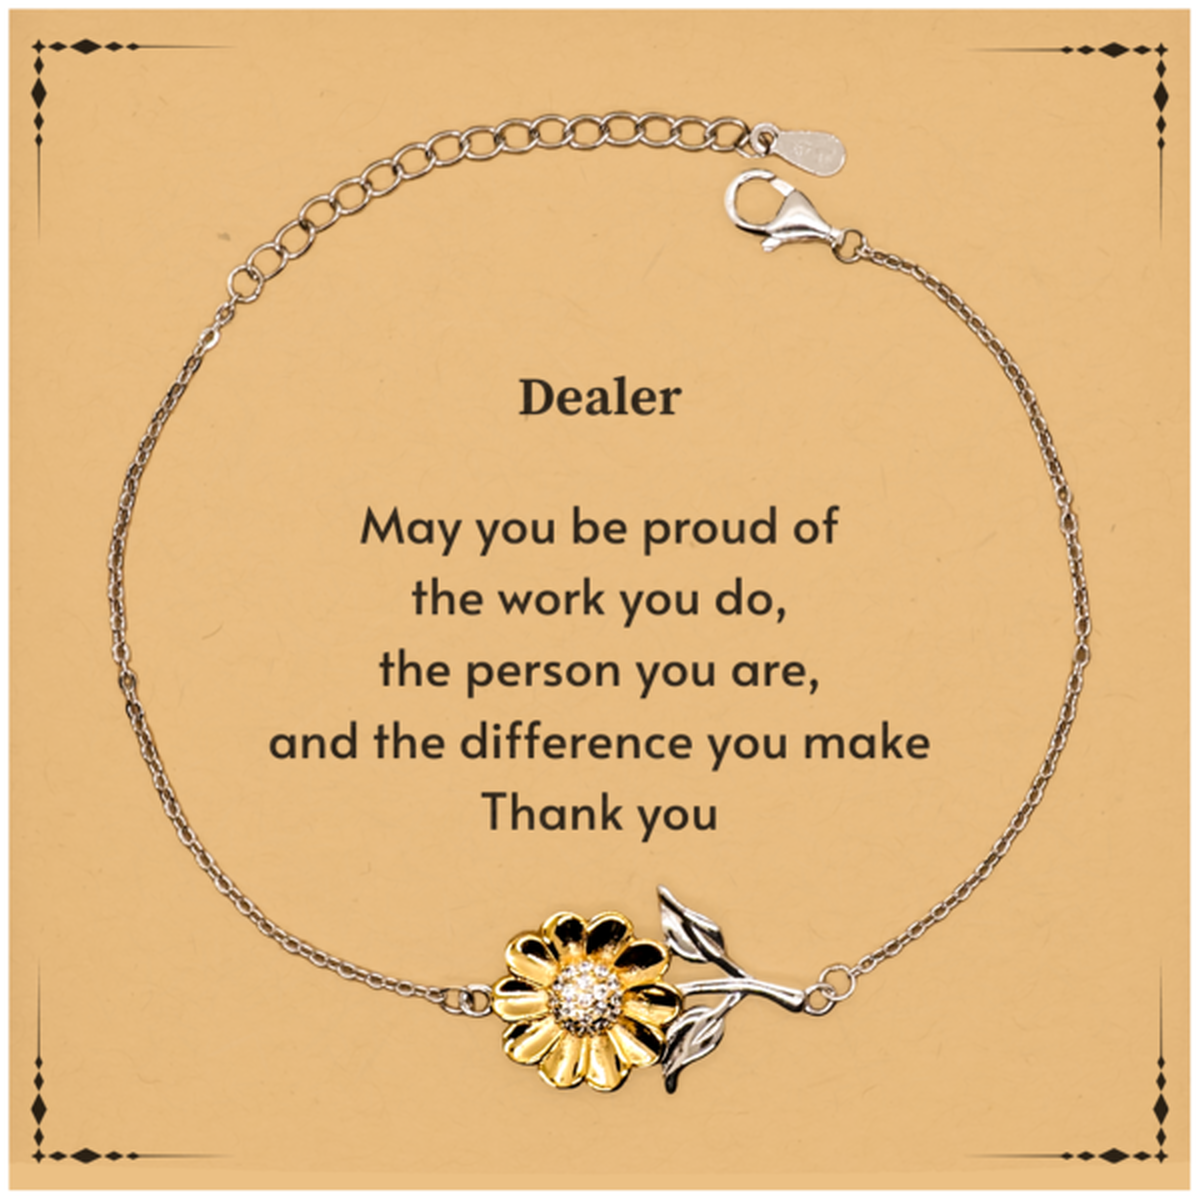 Heartwarming Sunflower Bracelet Retirement Coworkers Gifts for Dealer, Dealer May You be proud of the work you do, the person you are Gifts for Boss Men Women Friends